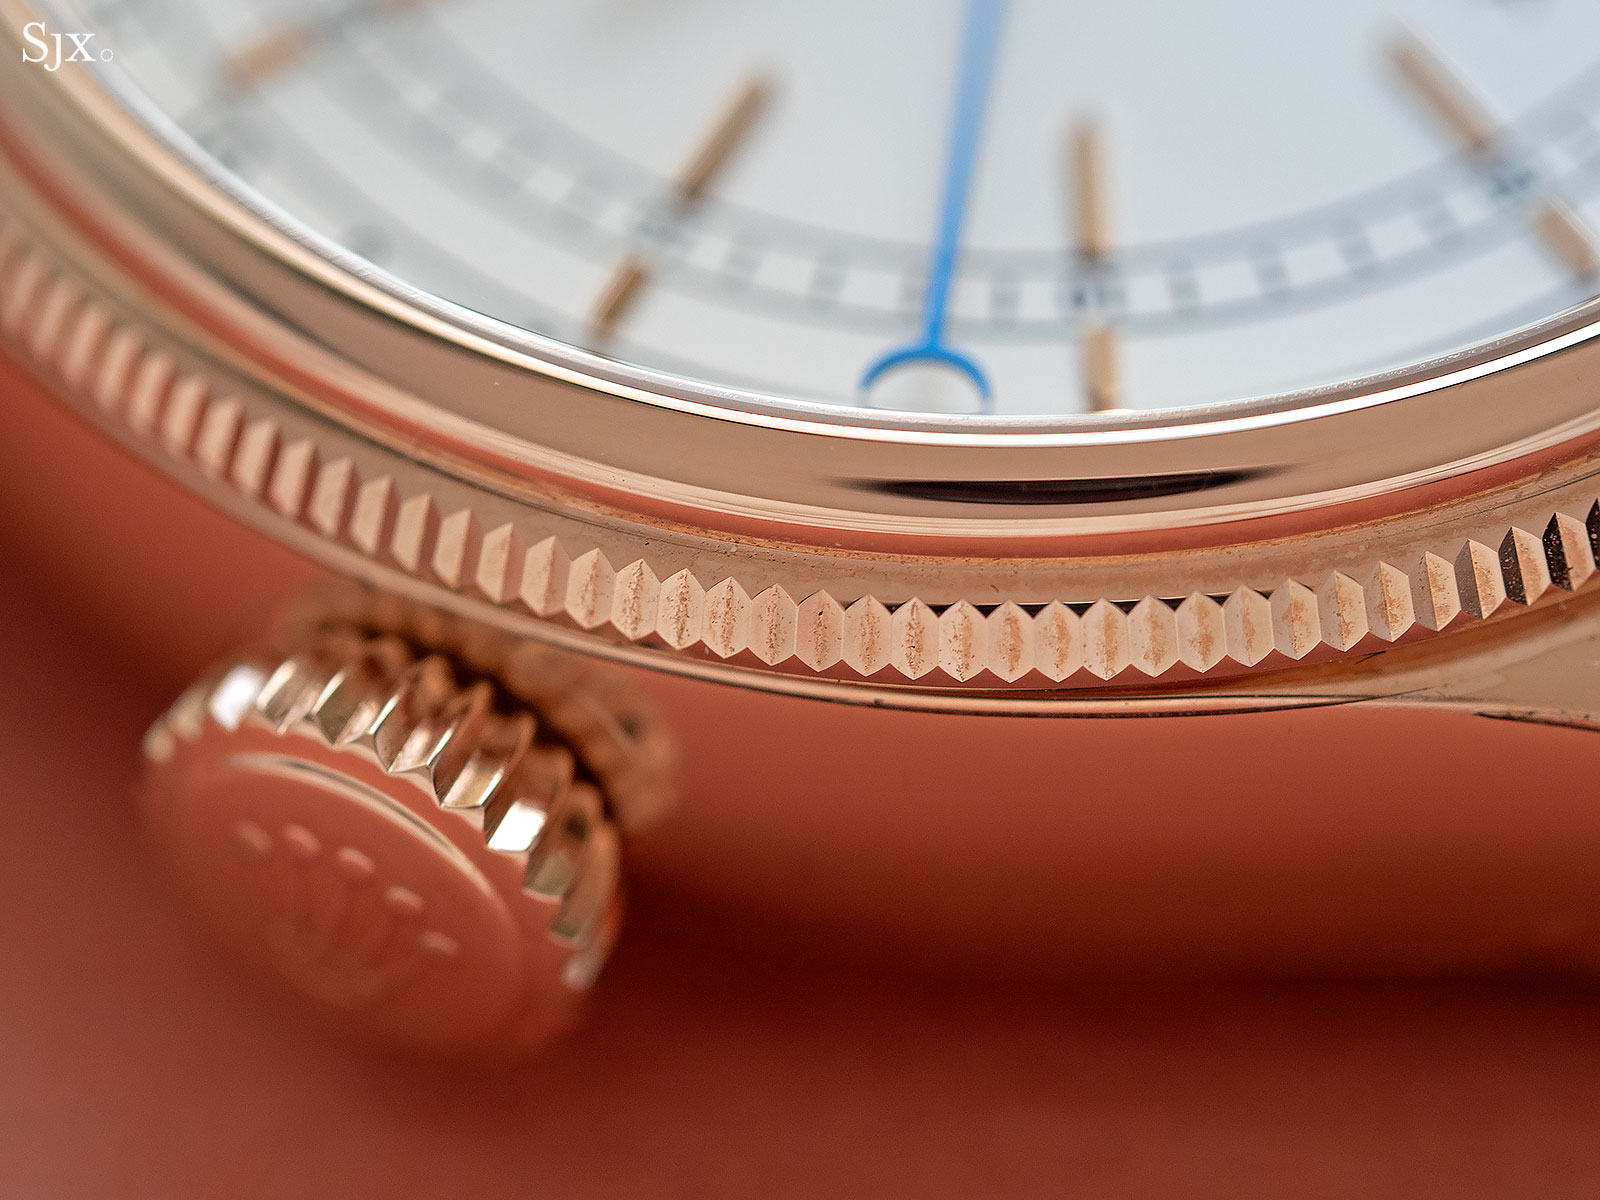 Rolex Cellini Moonphase 50535 review 13